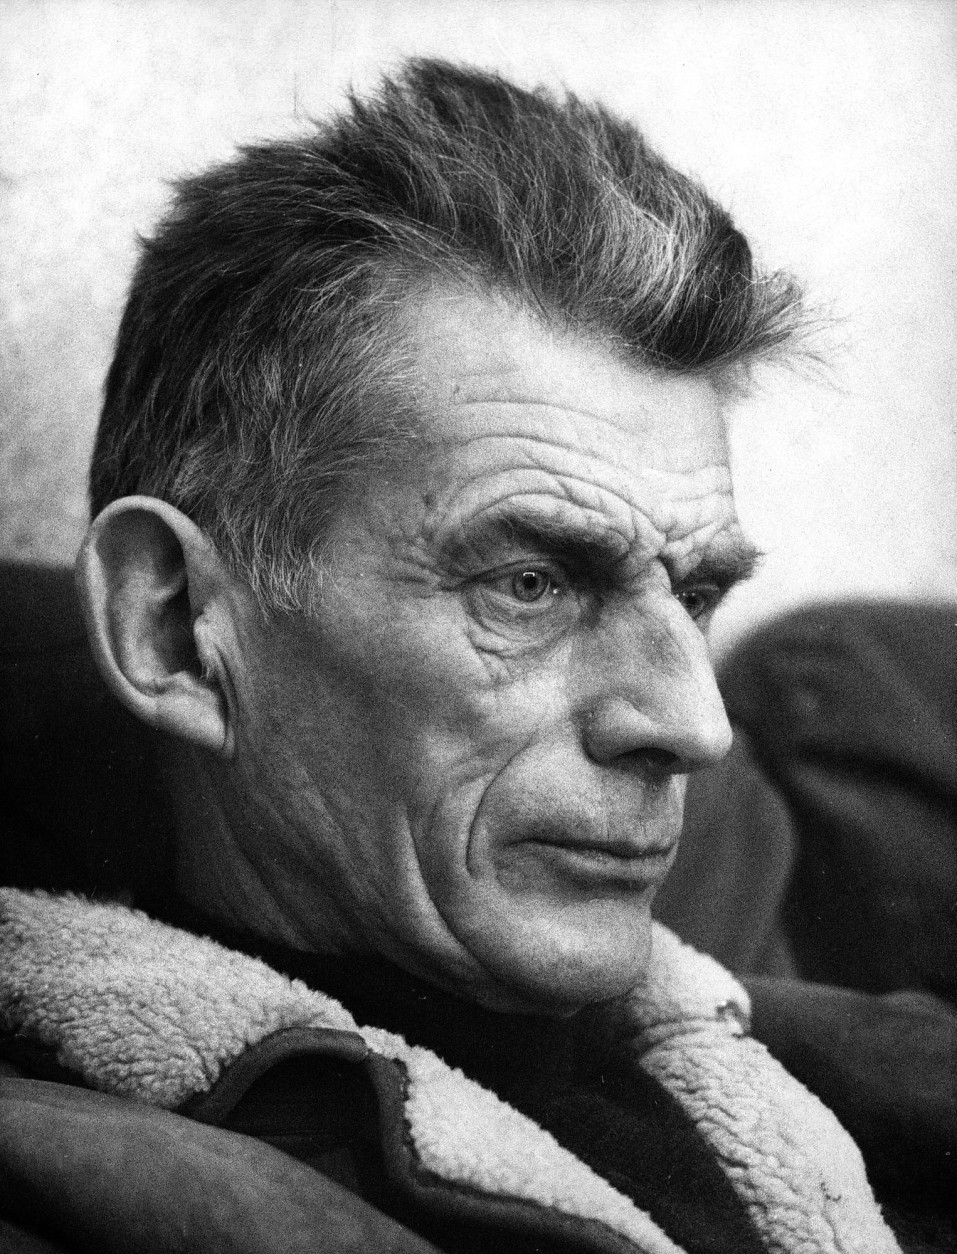 Portrait of playwright Samuel Beckett, made in Paris January 20th, 1966 as Beckett was supervising the filmic conception of his play "Comedy"  (AP-Photo/Barbara Jackson) 20.1.1966